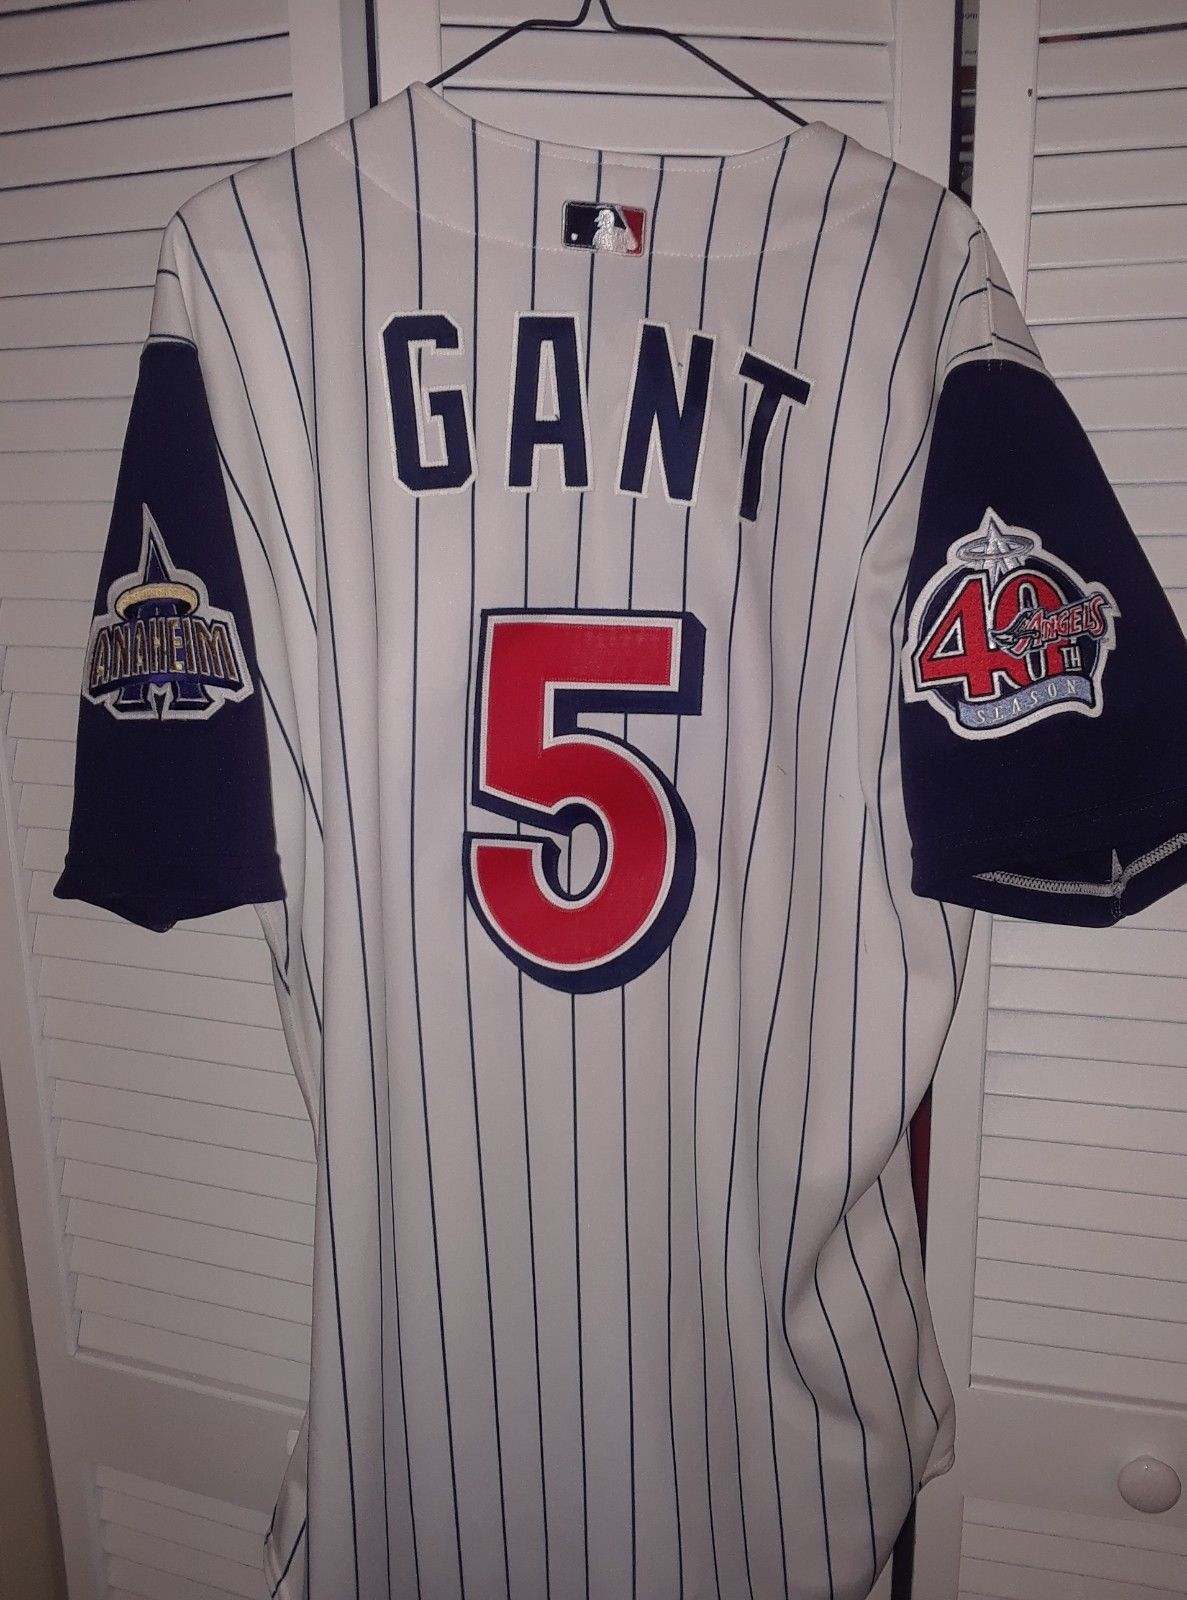 2000 Anaheim Angels RON GANT game used jersey size 46 rare style Disney